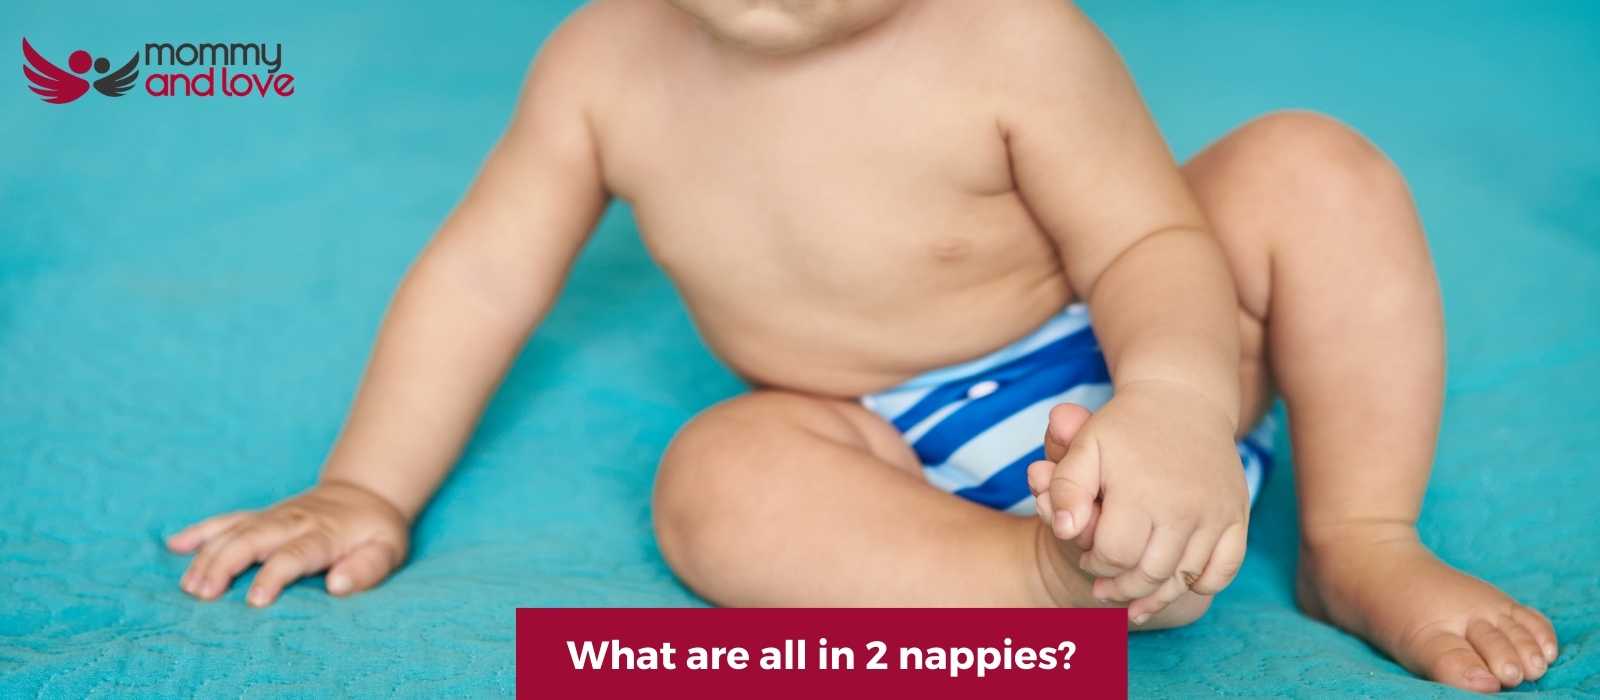 What are all in 2 nappies